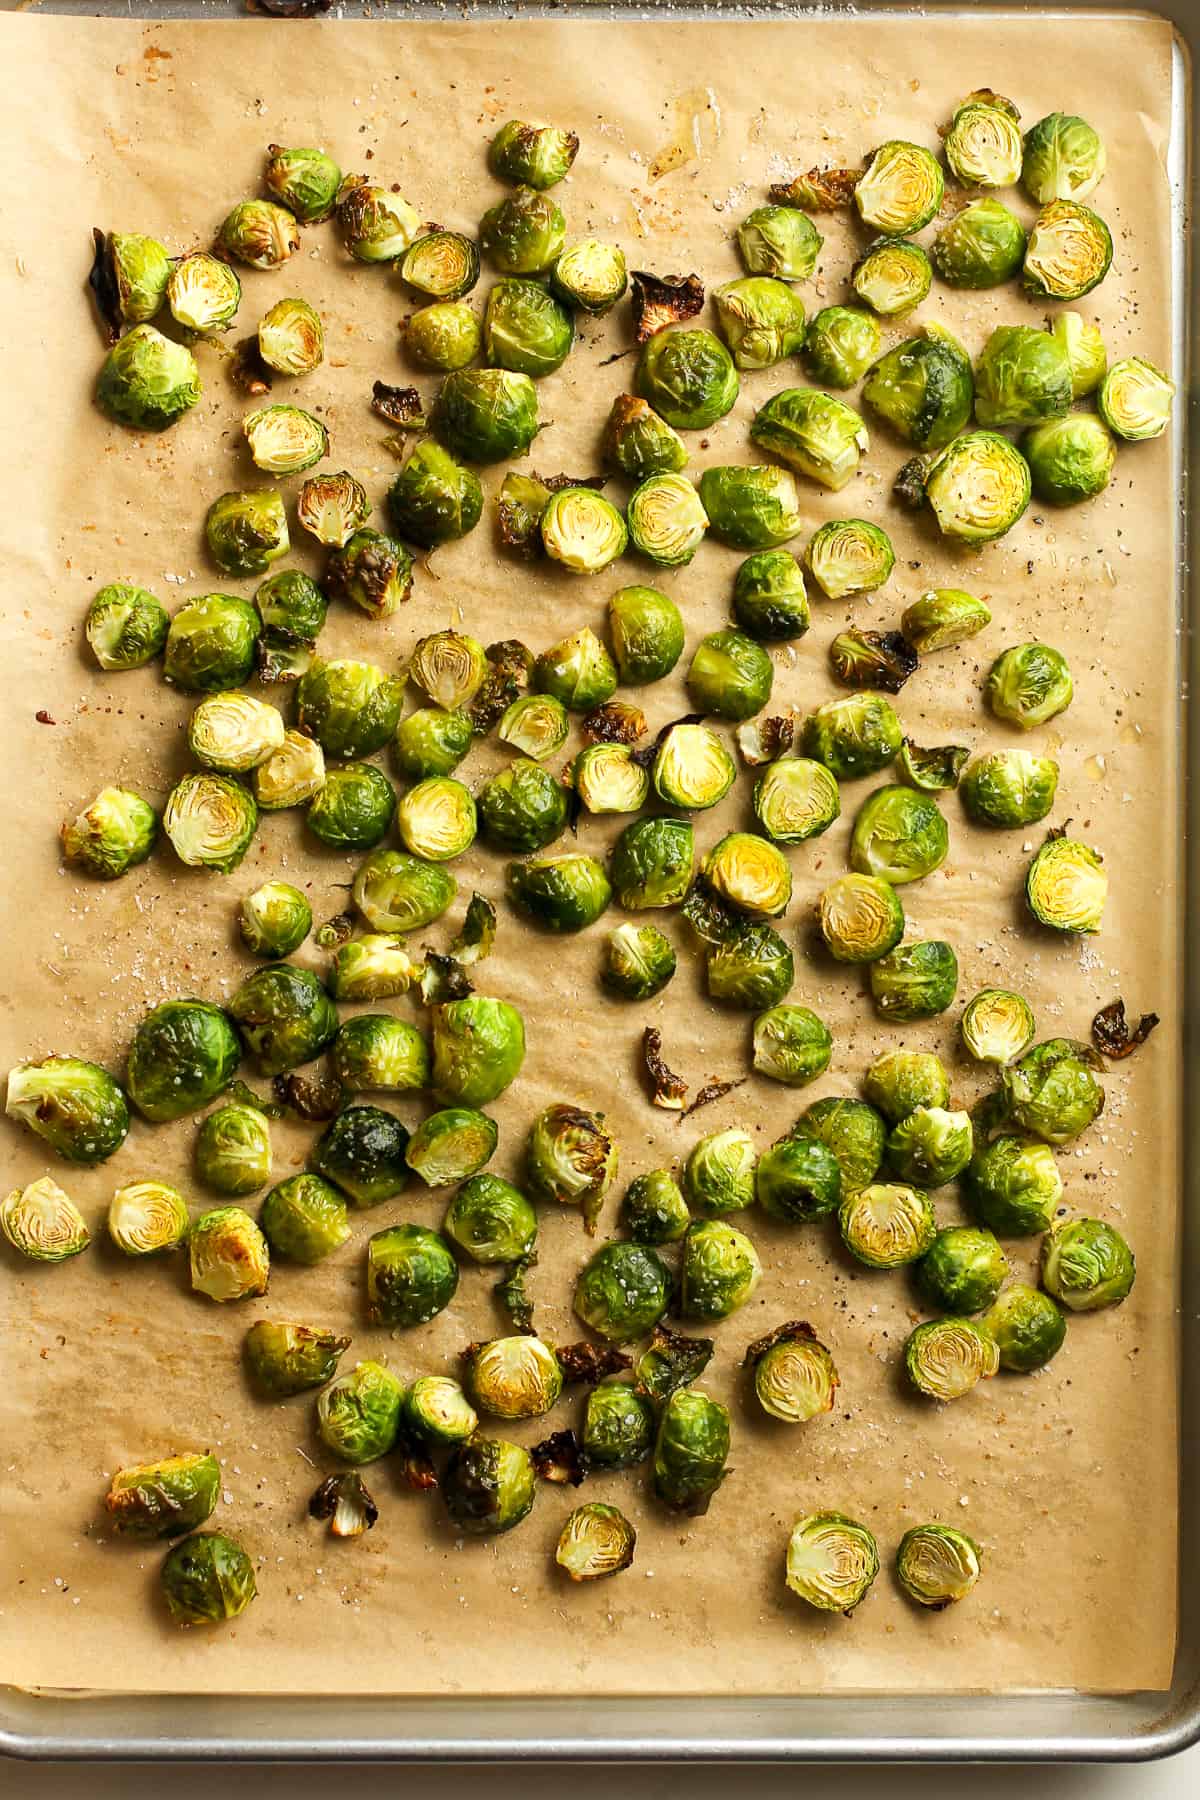 The Roasted Brussels sprouts on a sheet pan.